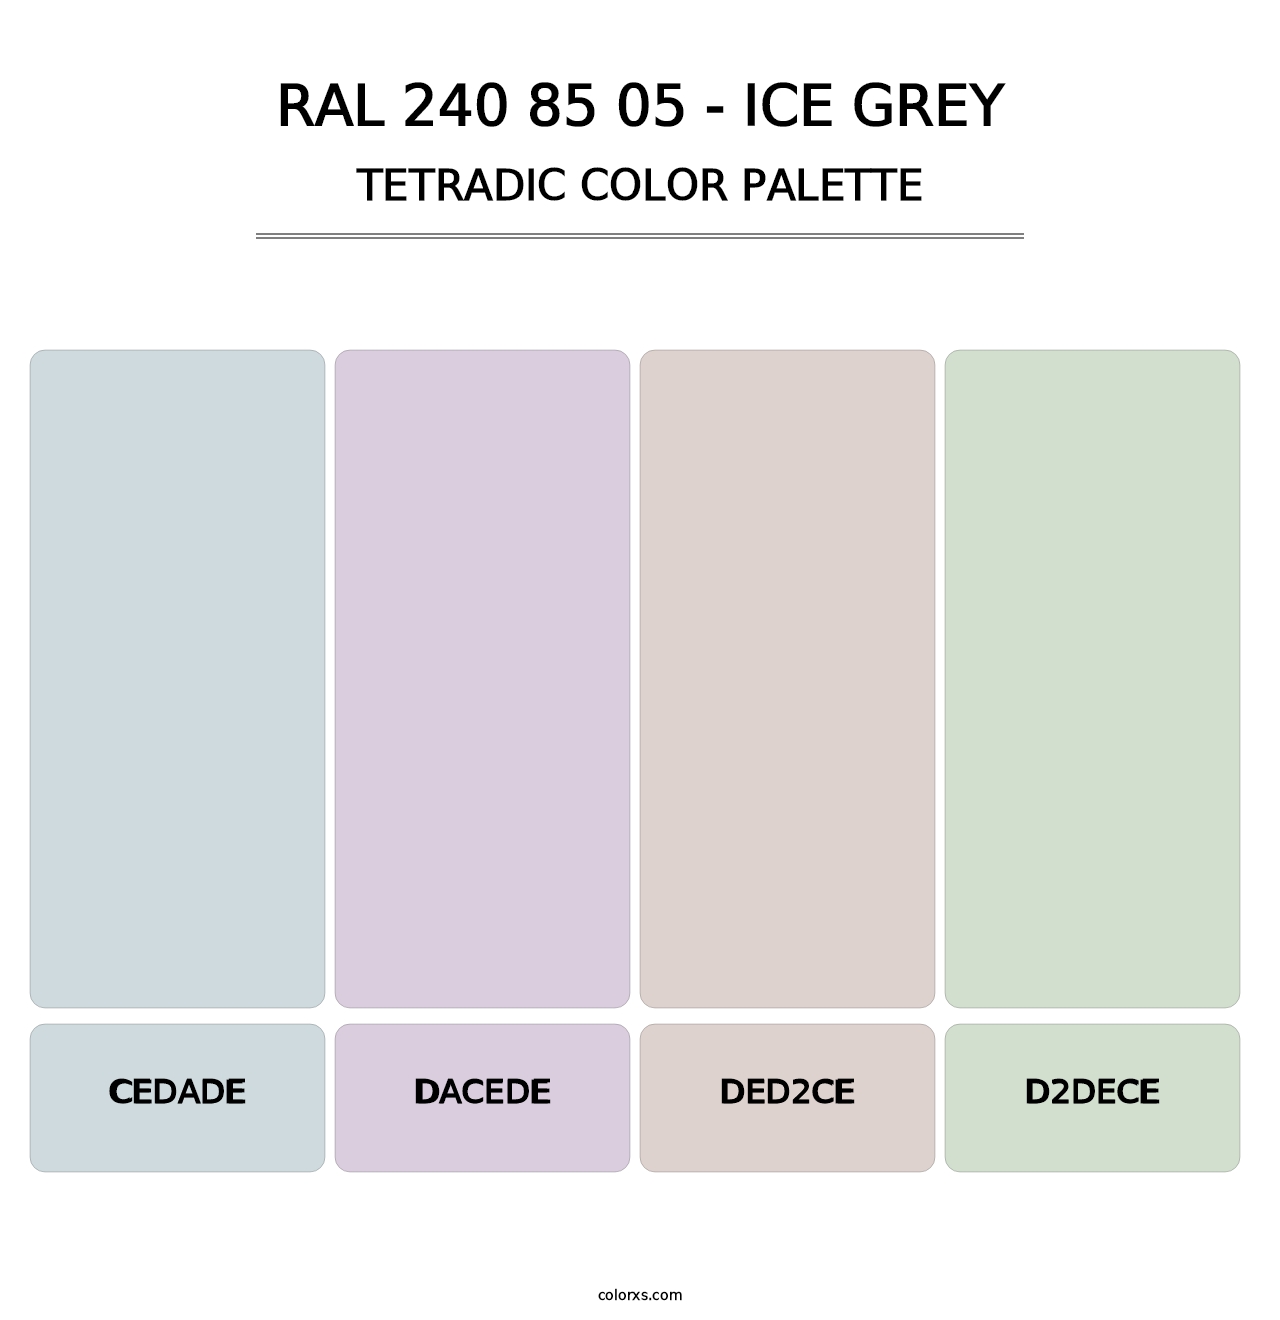 RAL 240 85 05 - Ice Grey - Tetradic Color Palette